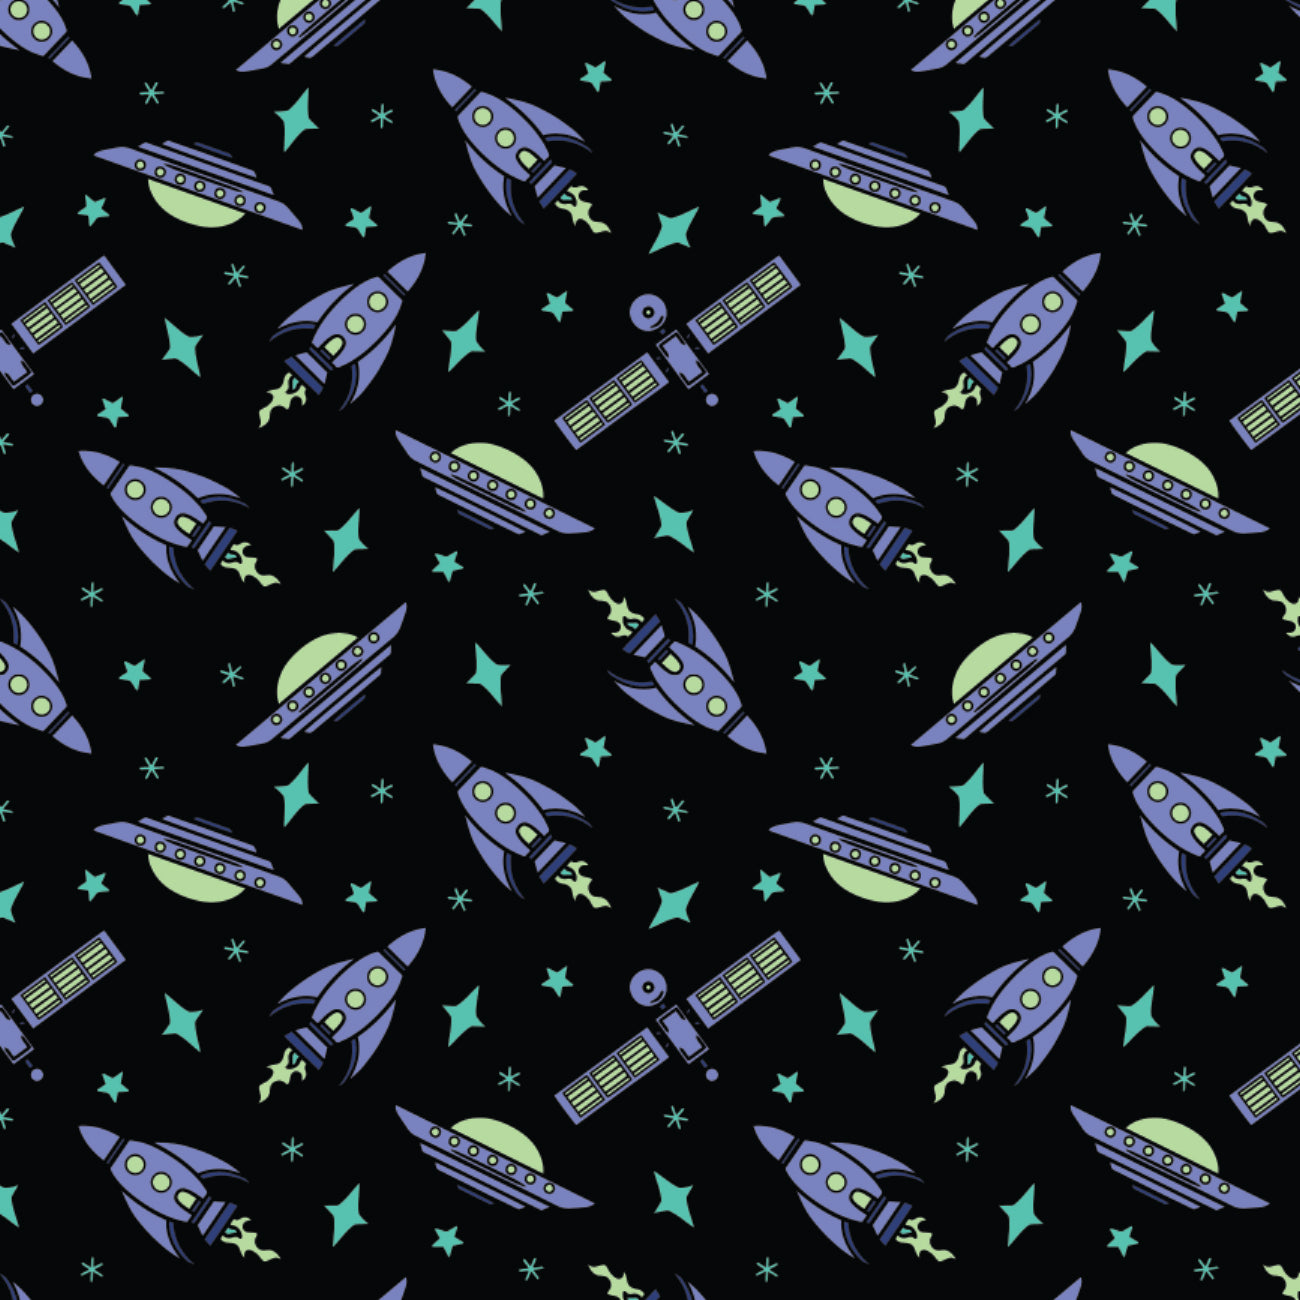 I Want to Believe Collection -2 Yard Cotton Cut - Space Exploration